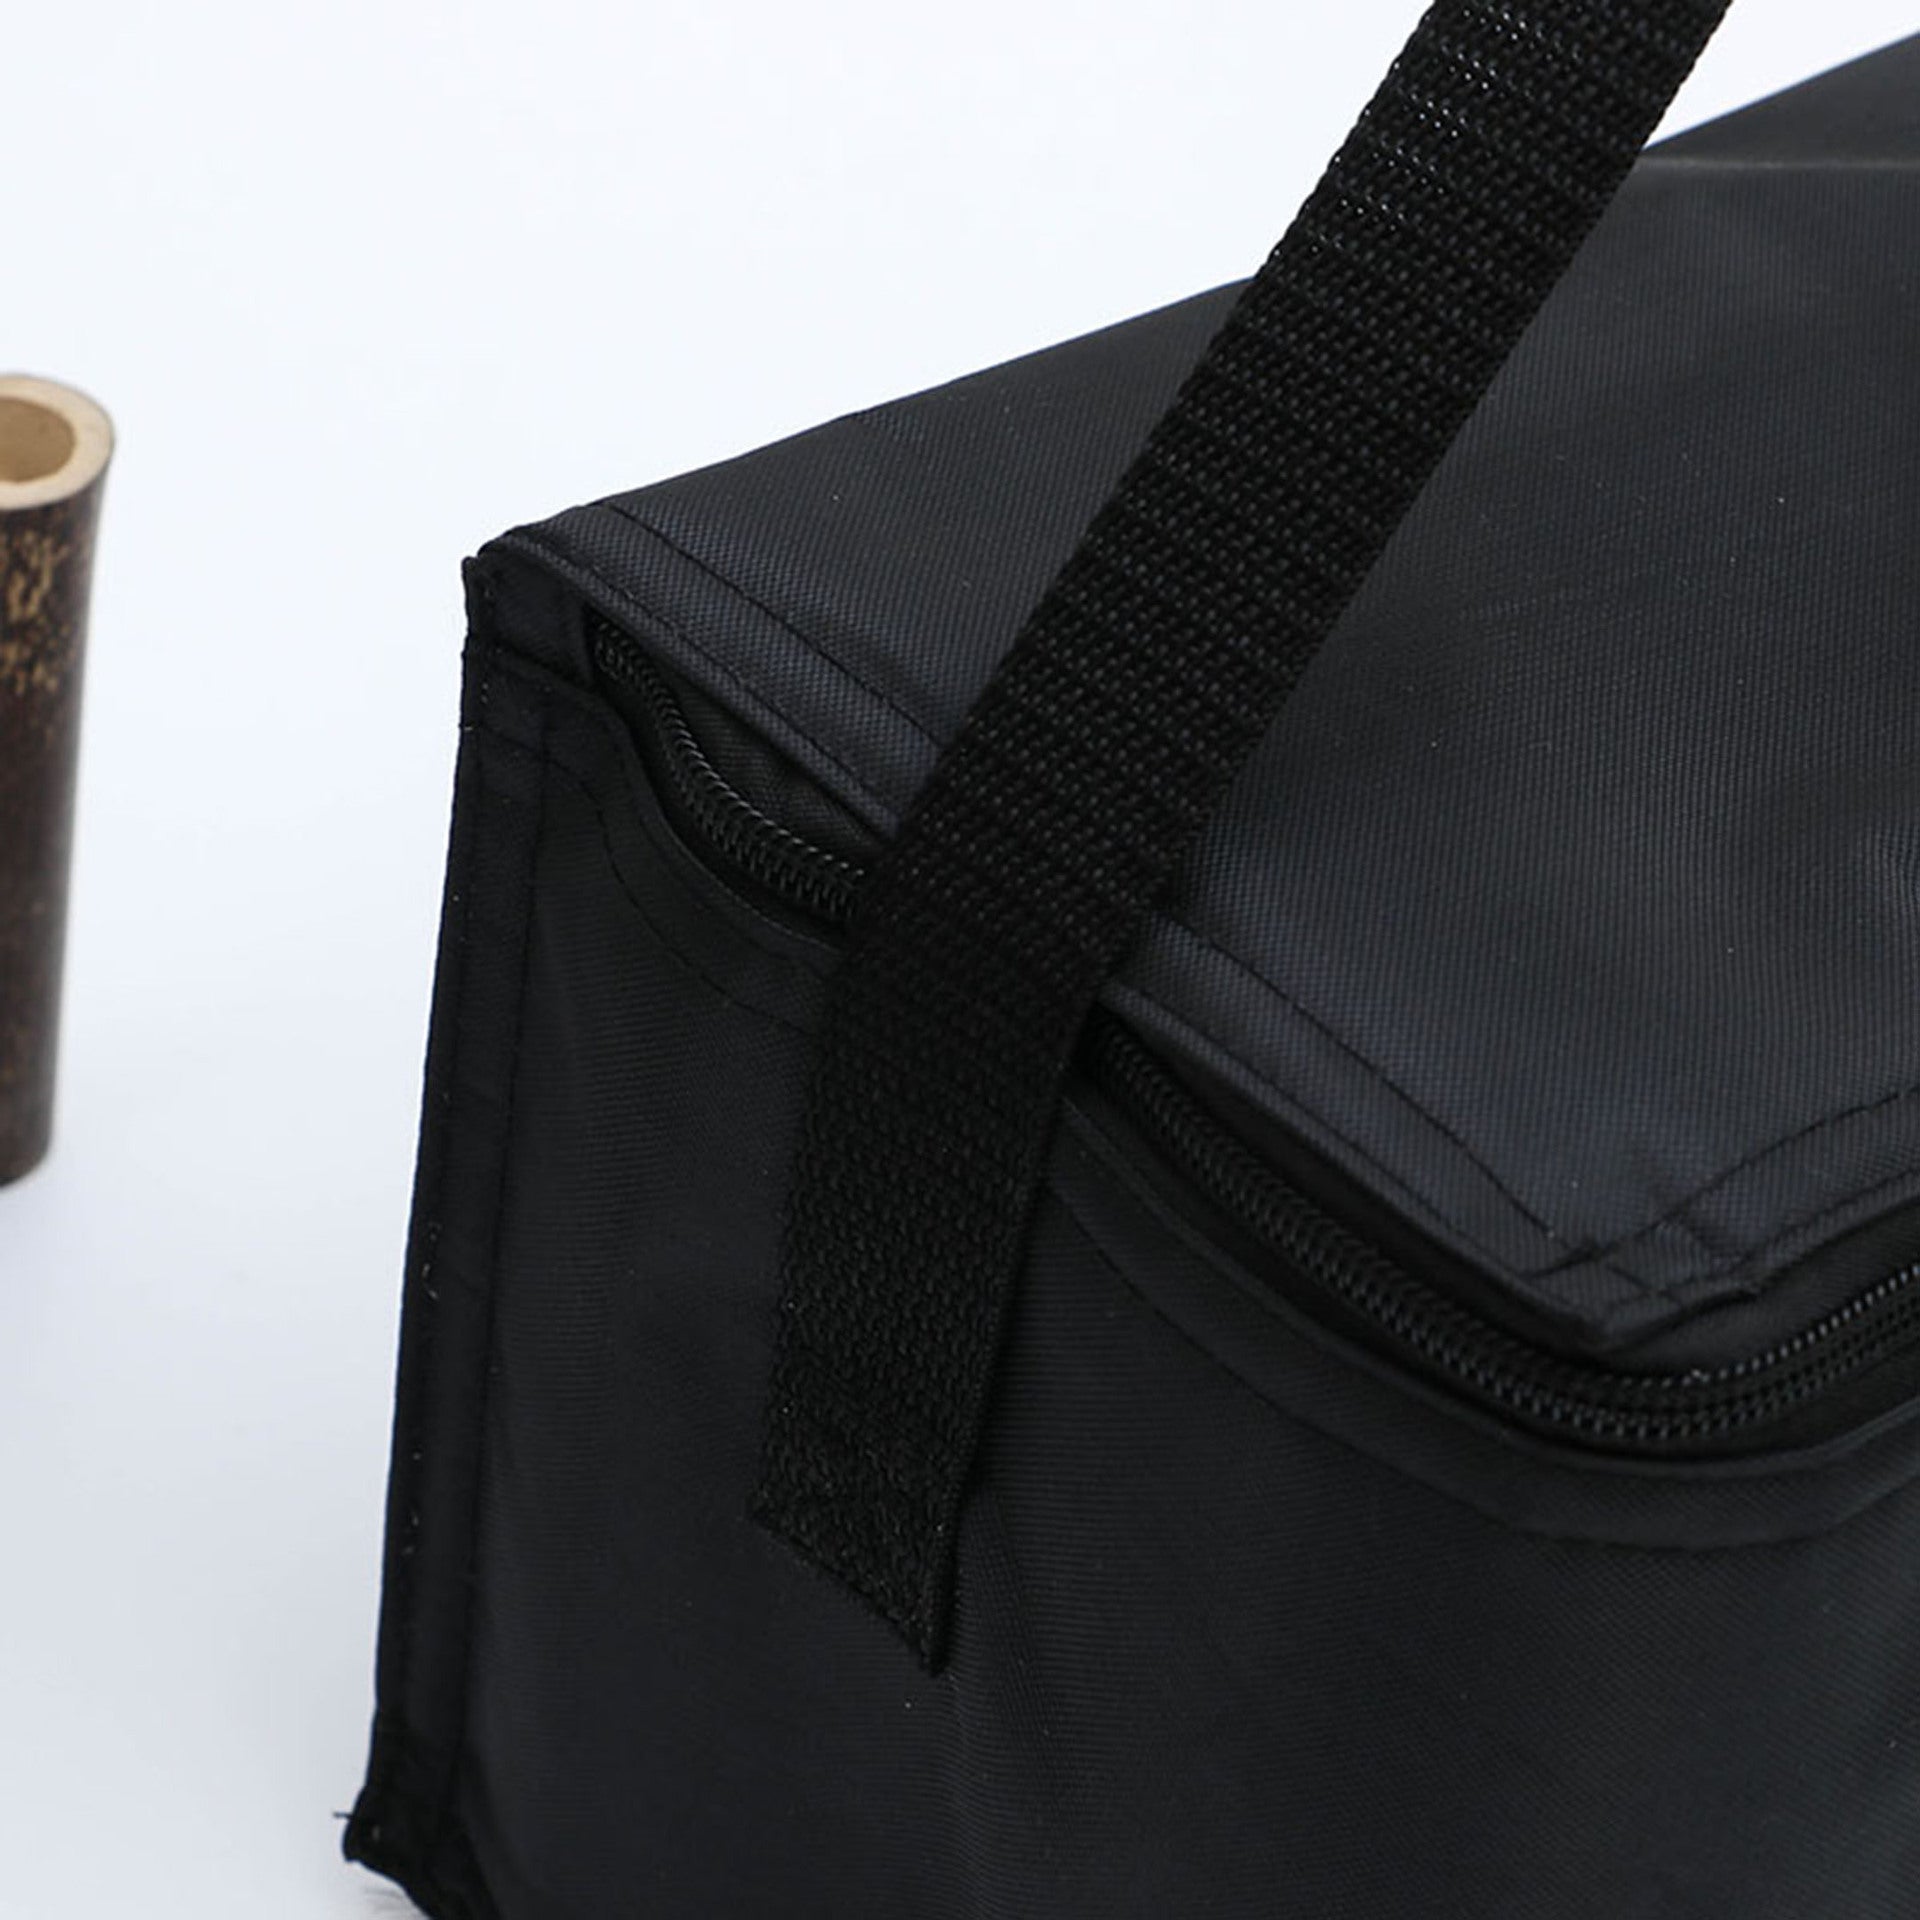 Black Insulated Cooler Bag on a gray surface